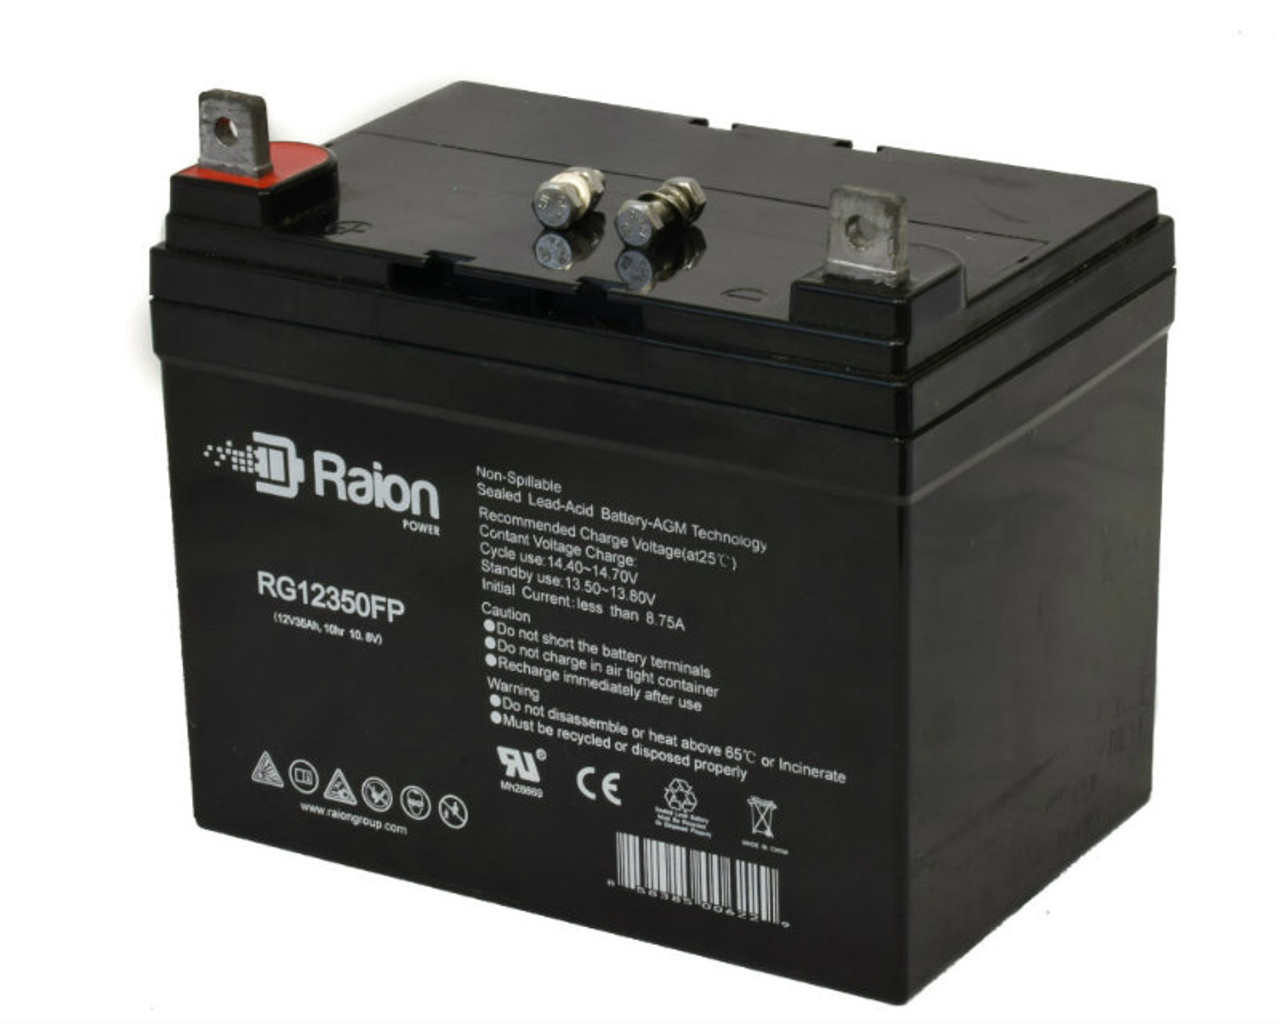 Raion Power Replacement 12V 35Ah RG12350FP Mobility Scooter Battery for Everest & Jennings Wheelchairs Metro Power